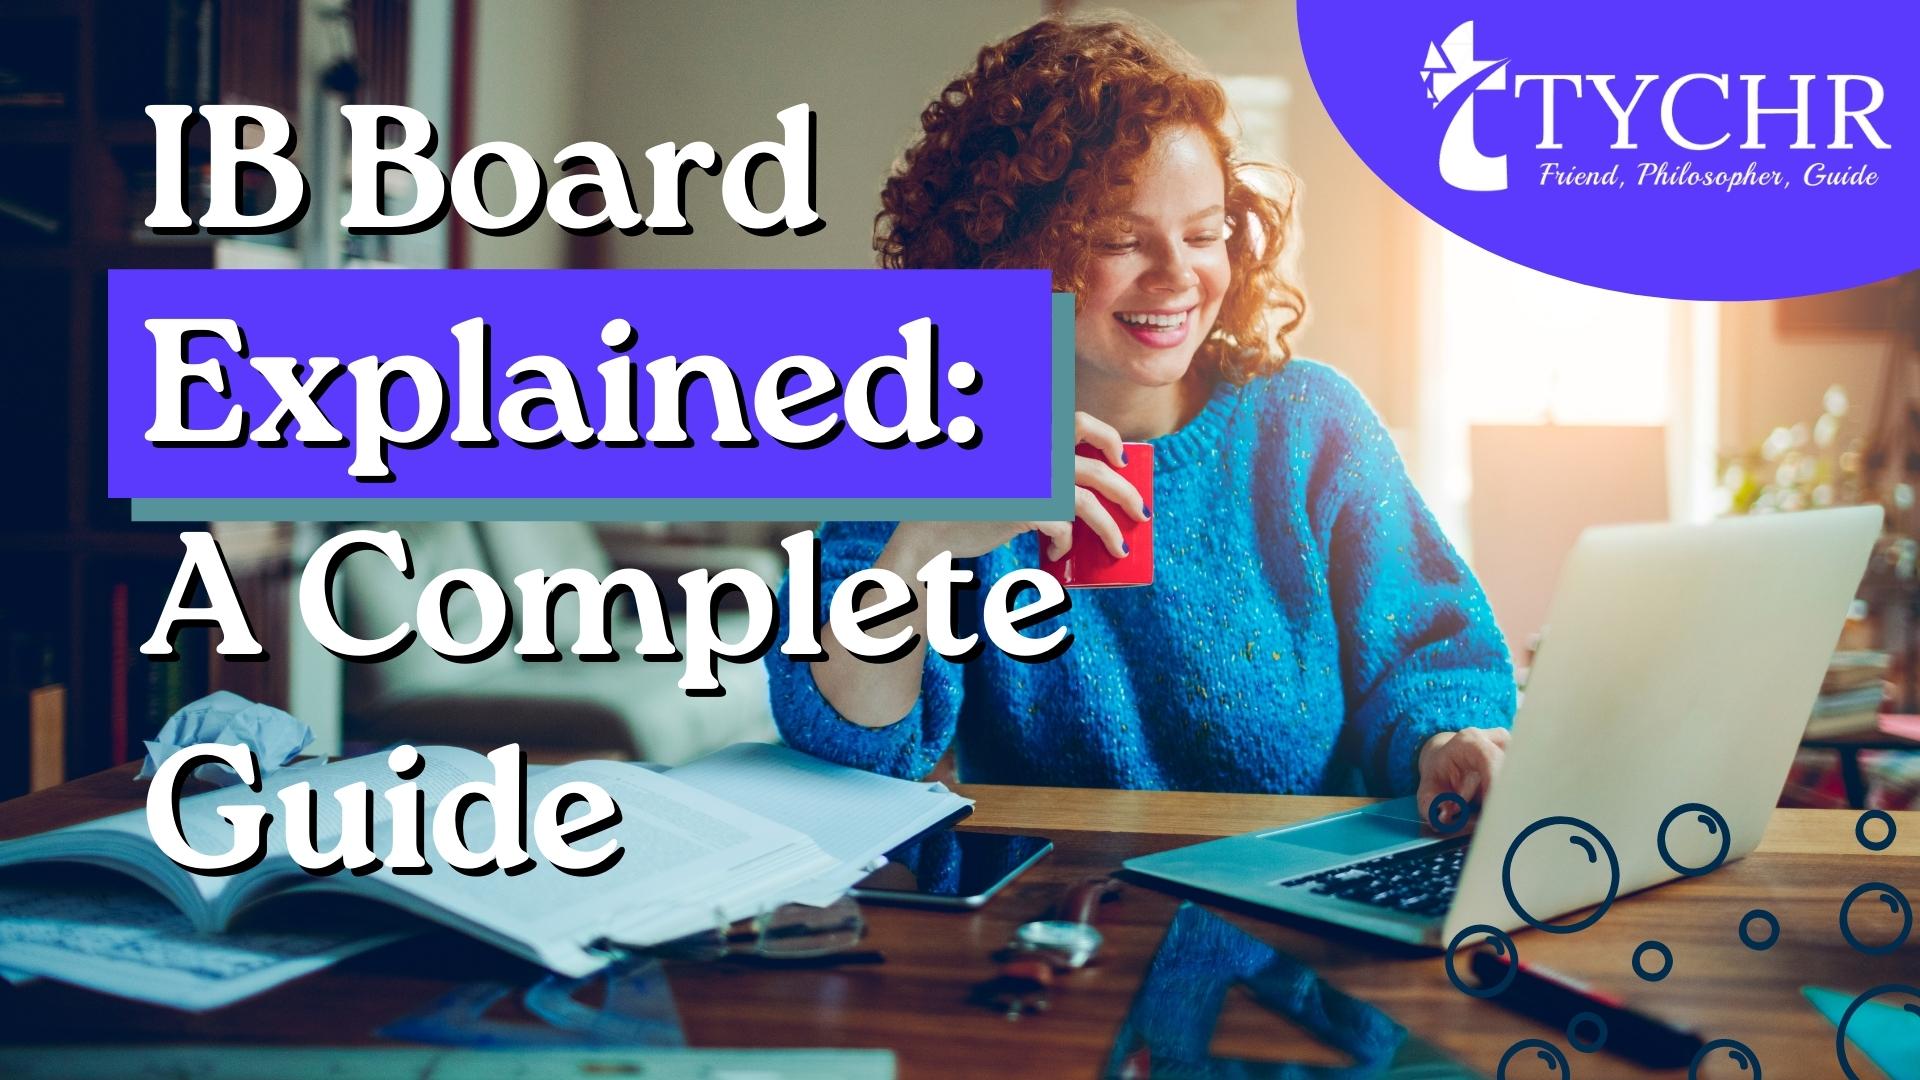 IB Board Explained A Complete Guide